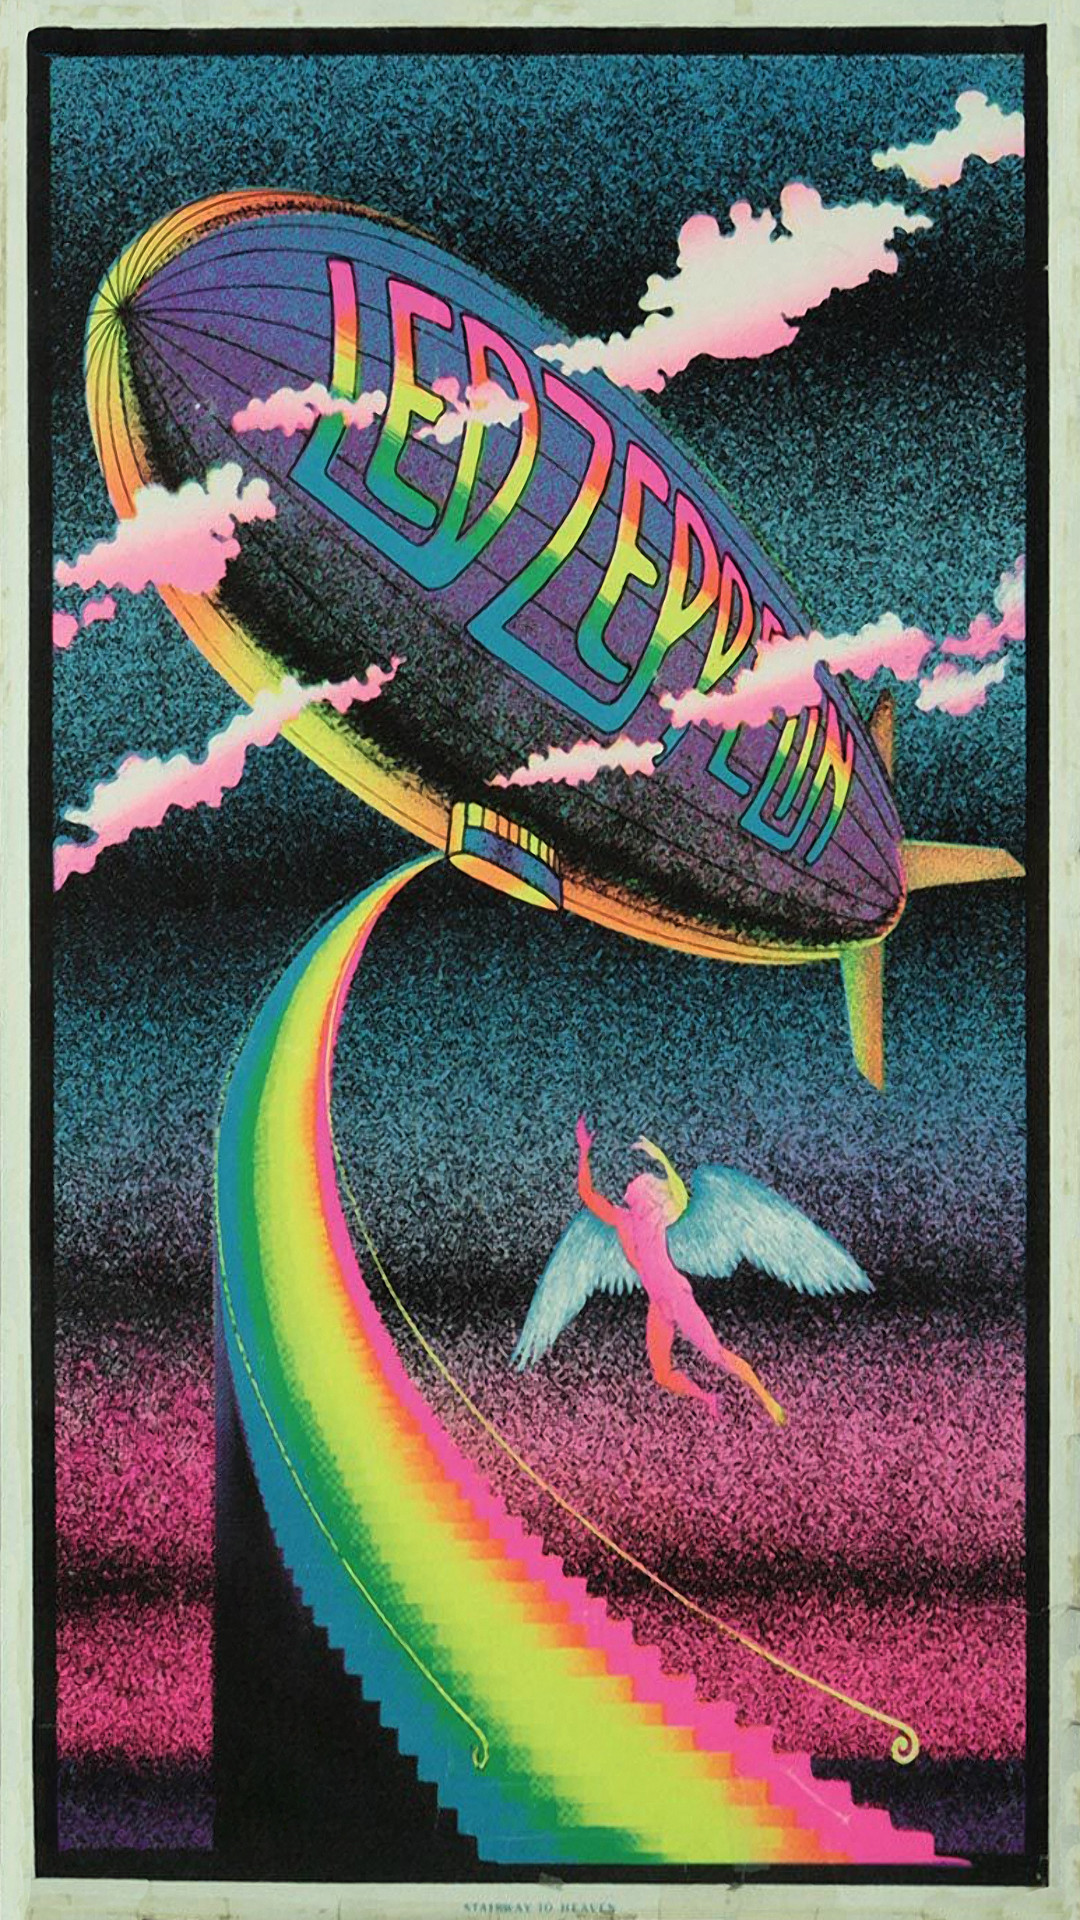 Made a phone background for Led Zeppelin 1 let me know what you think   rledzeppelin